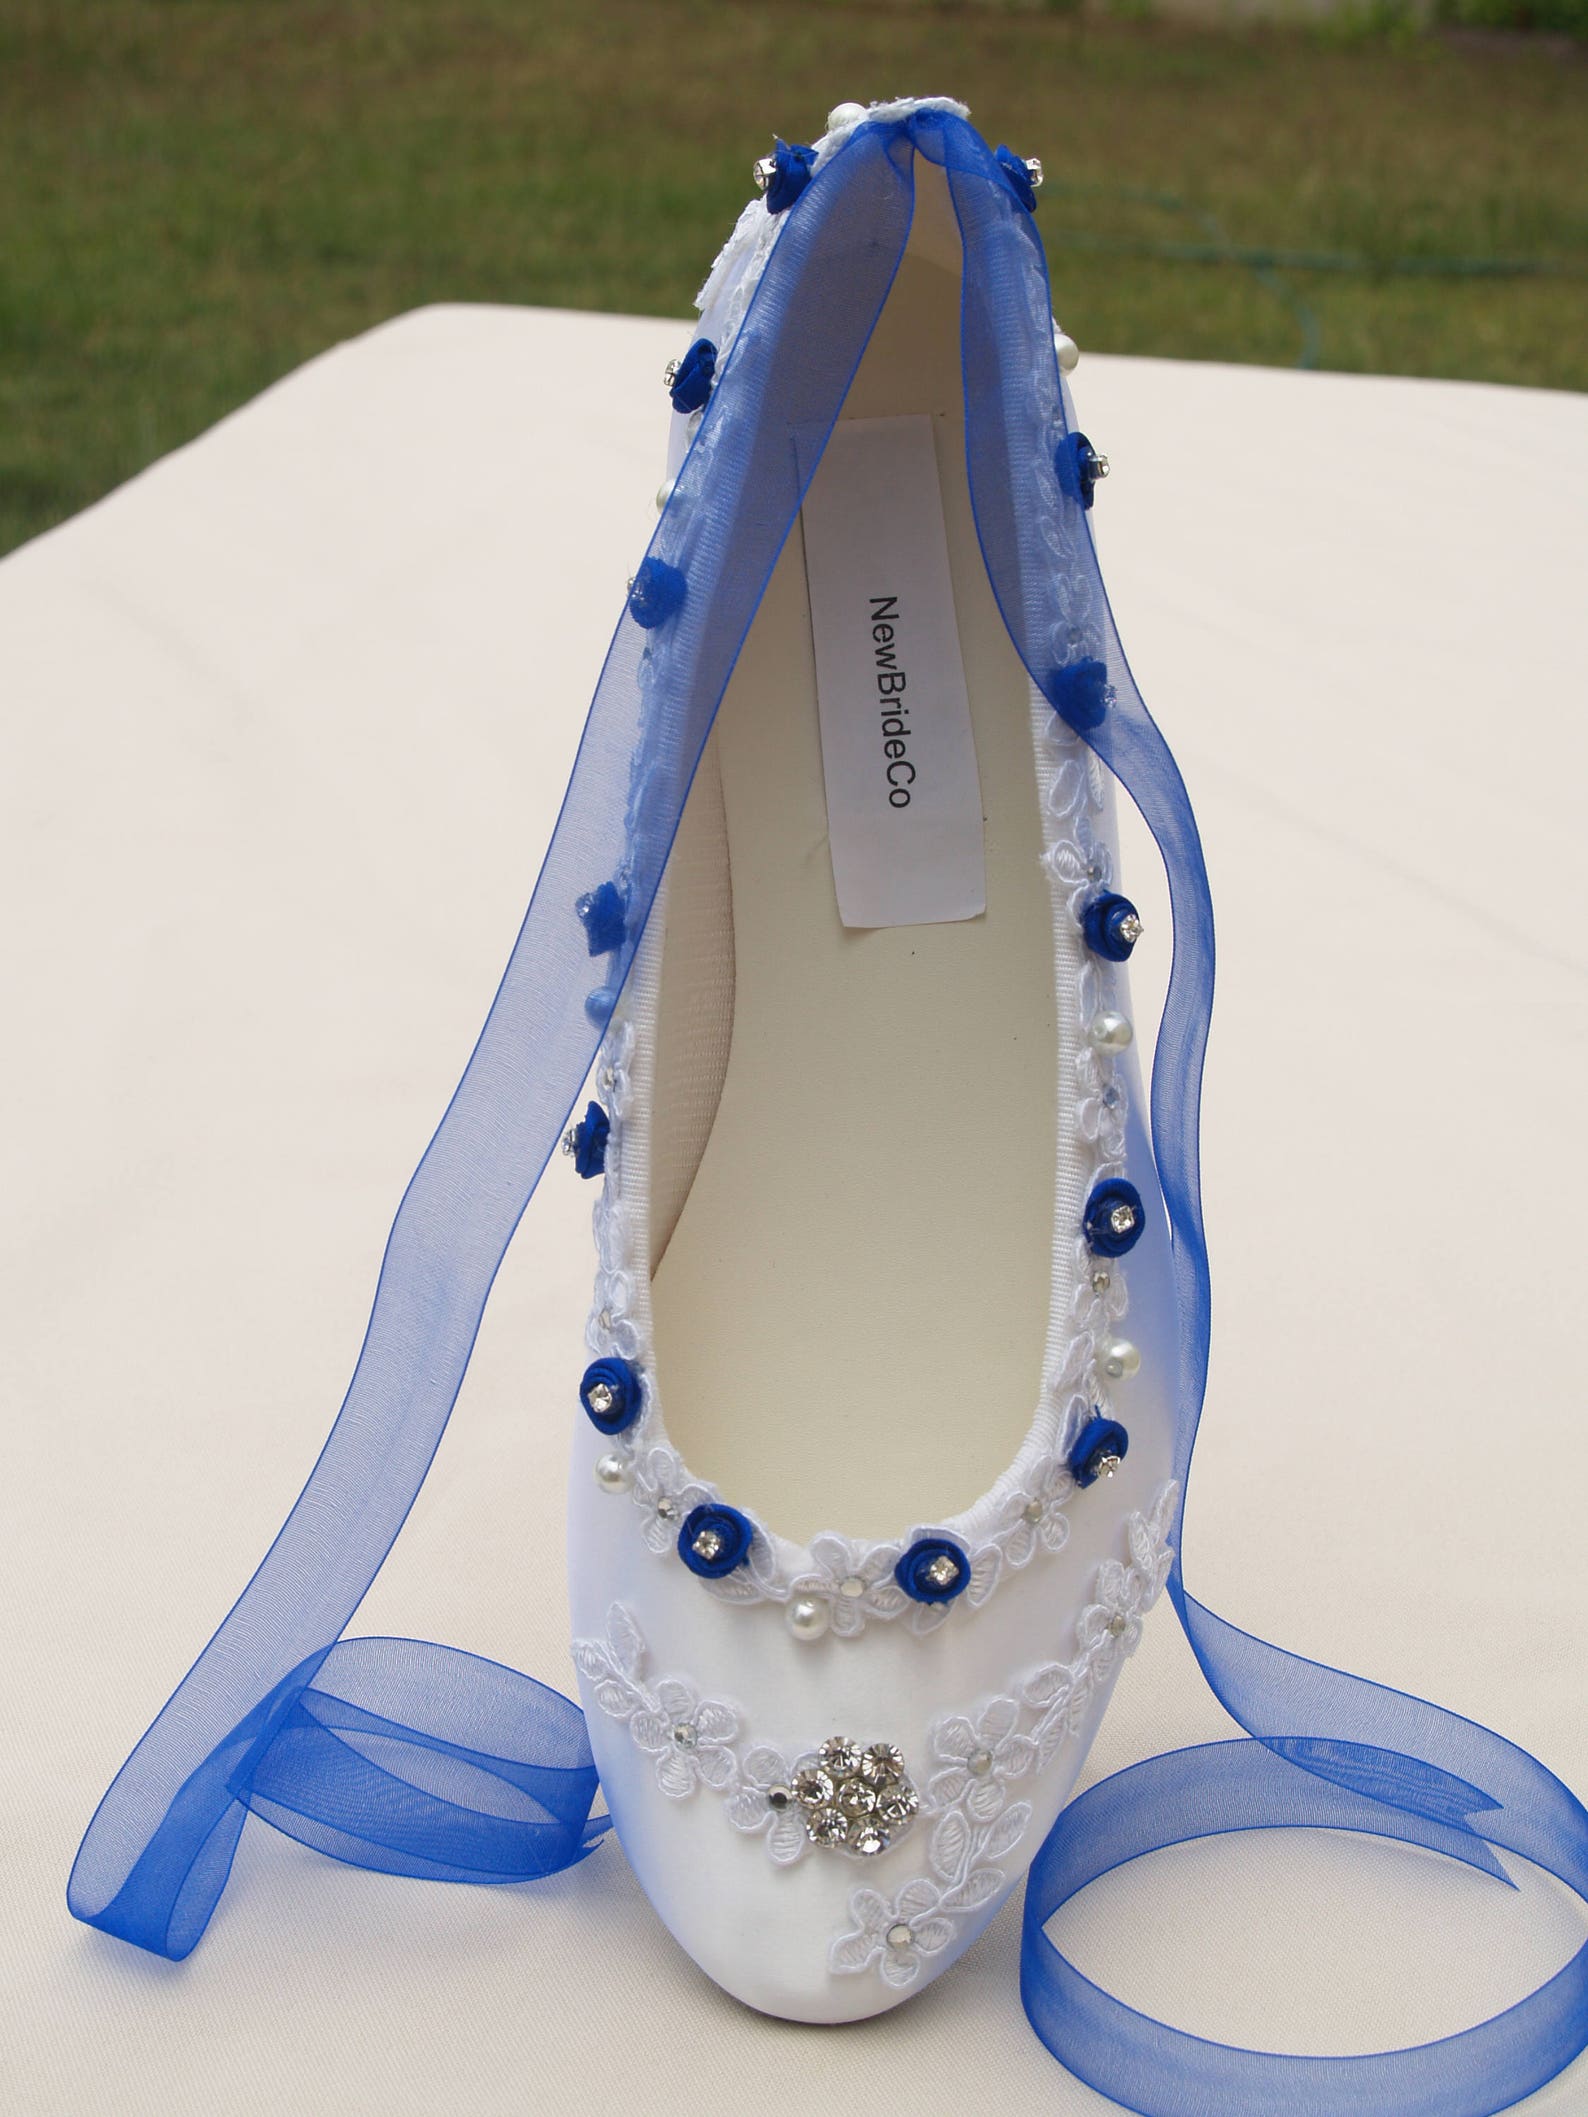 wedding royal blue flats white shoes venice lace edging with flowers crystals, romantic ballet style slipper, lace with pearls a